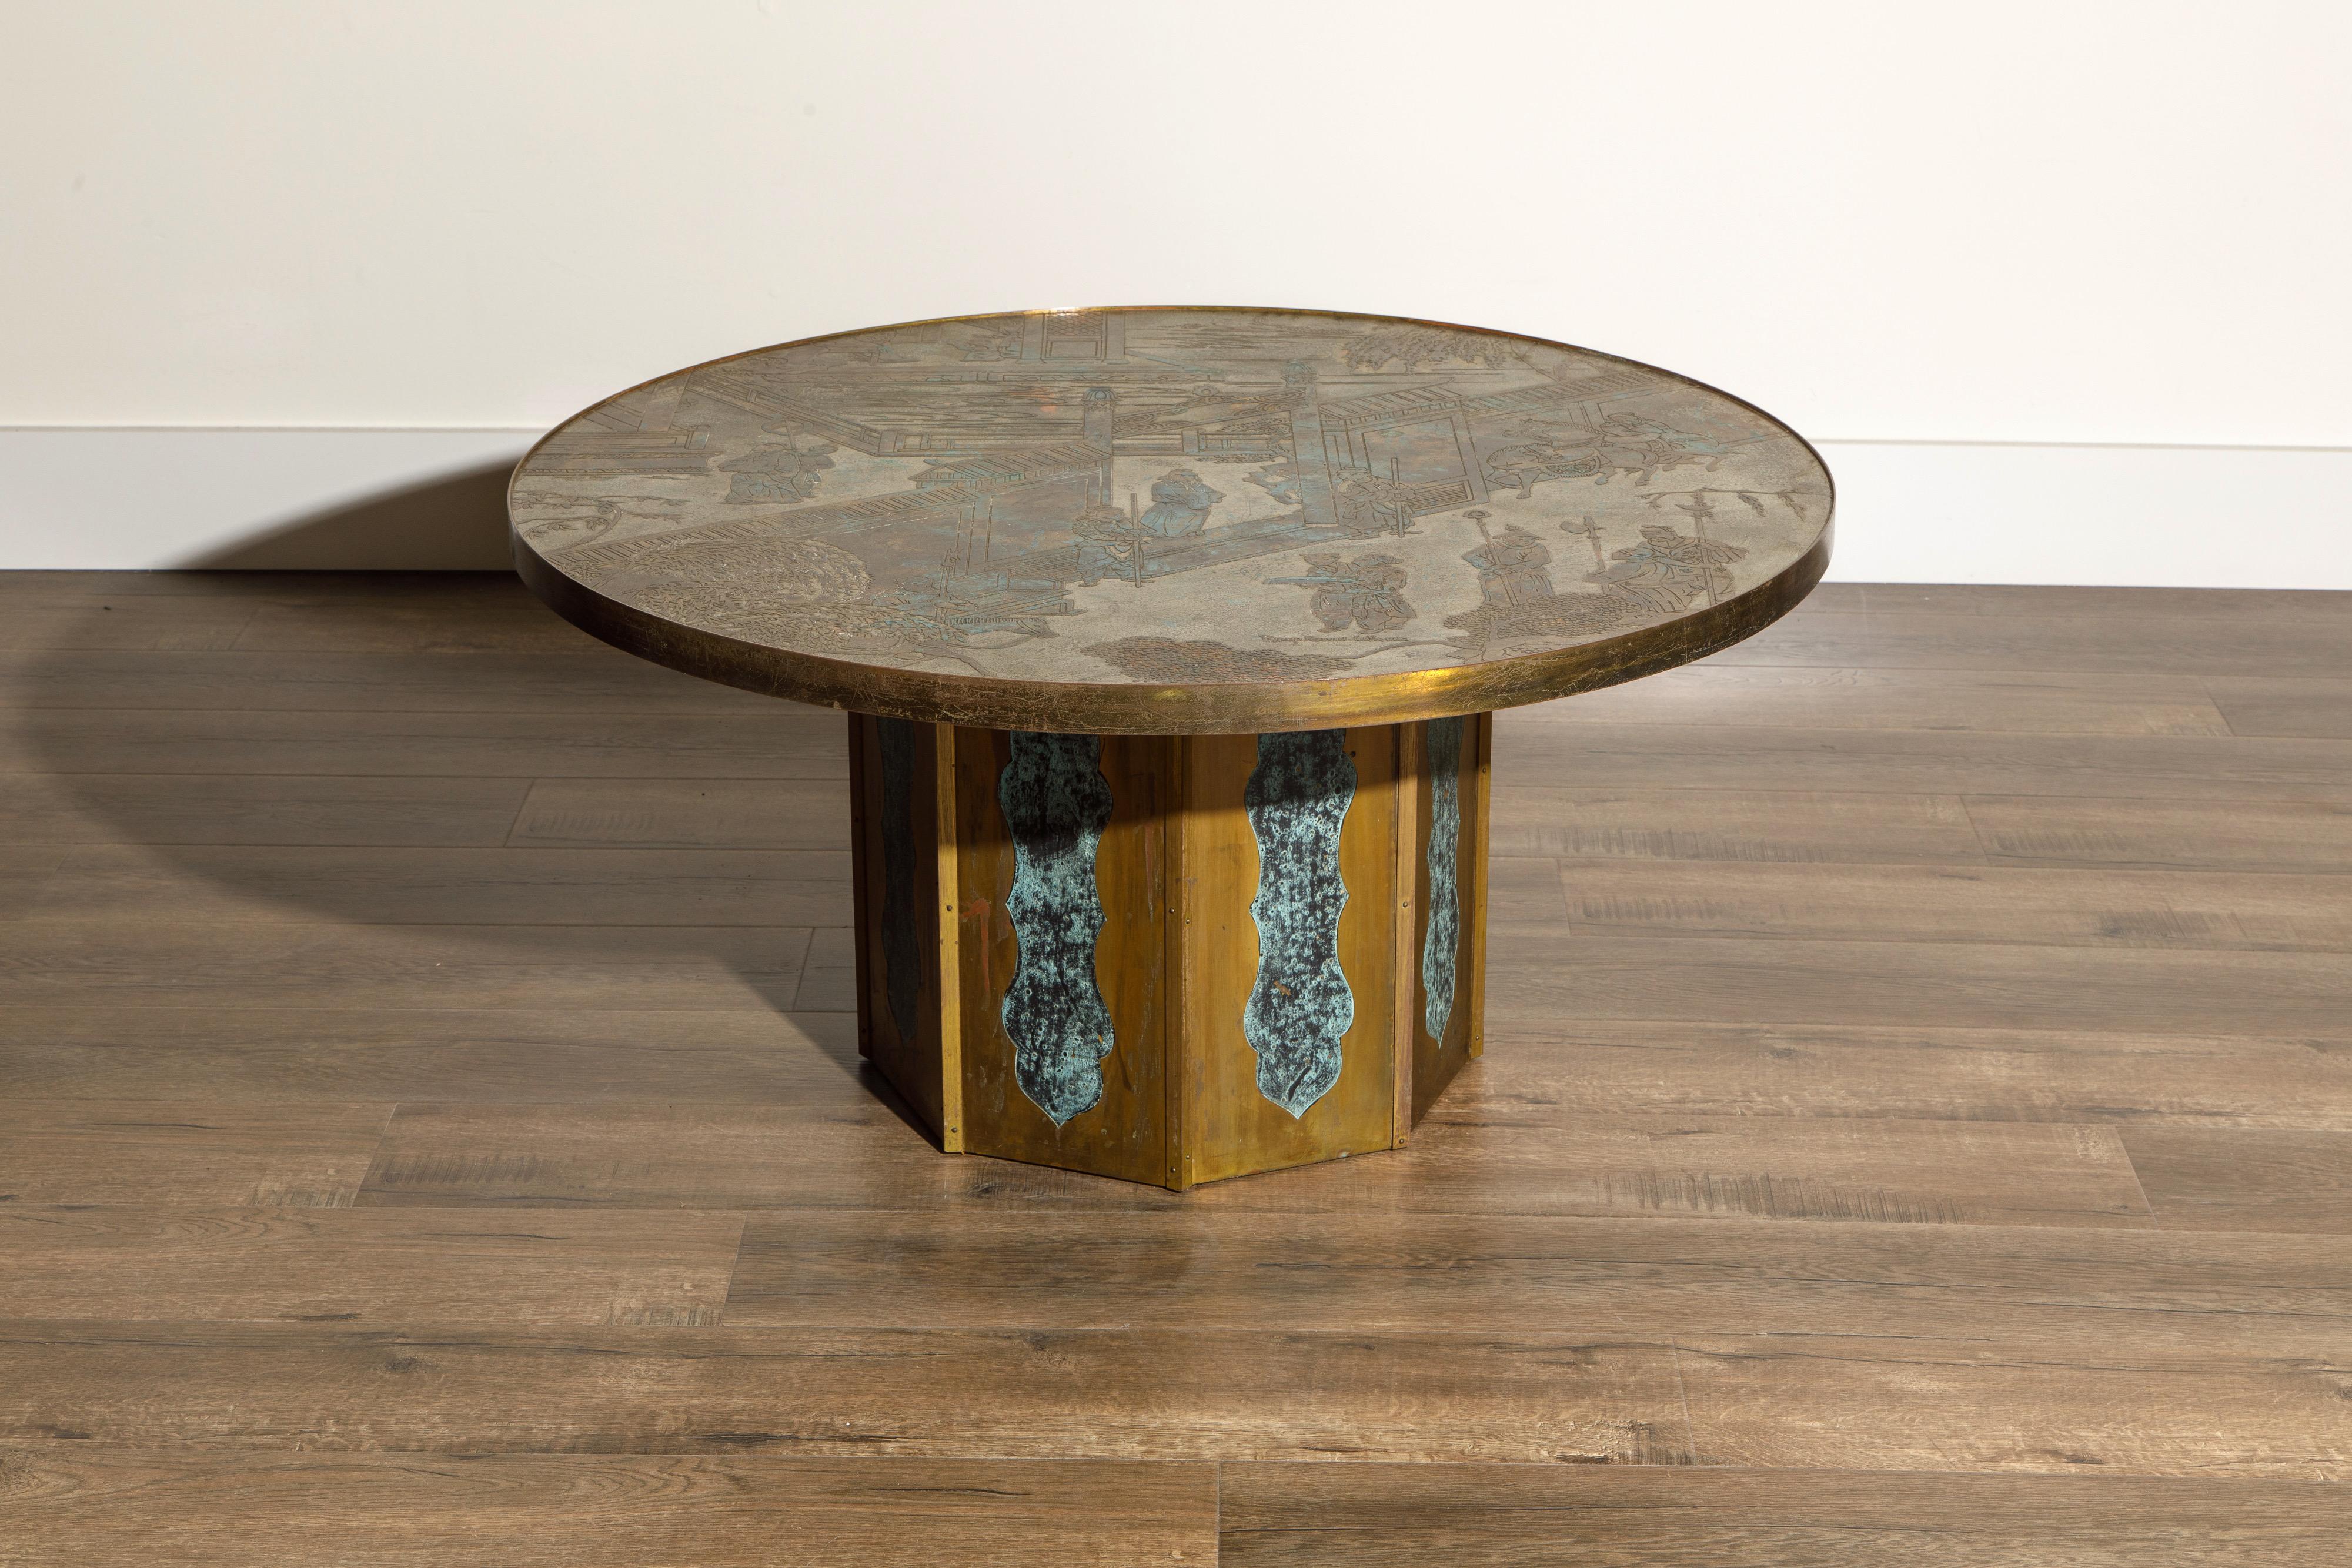 This classic and highly sought-after collectors item is a 'Chan' cocktail table by father and son team, Philip and Kelvin LaVerne, handmade in the 1960s. Ingeniously designed with acid etching and patinated polychrome bronze and pewter, this